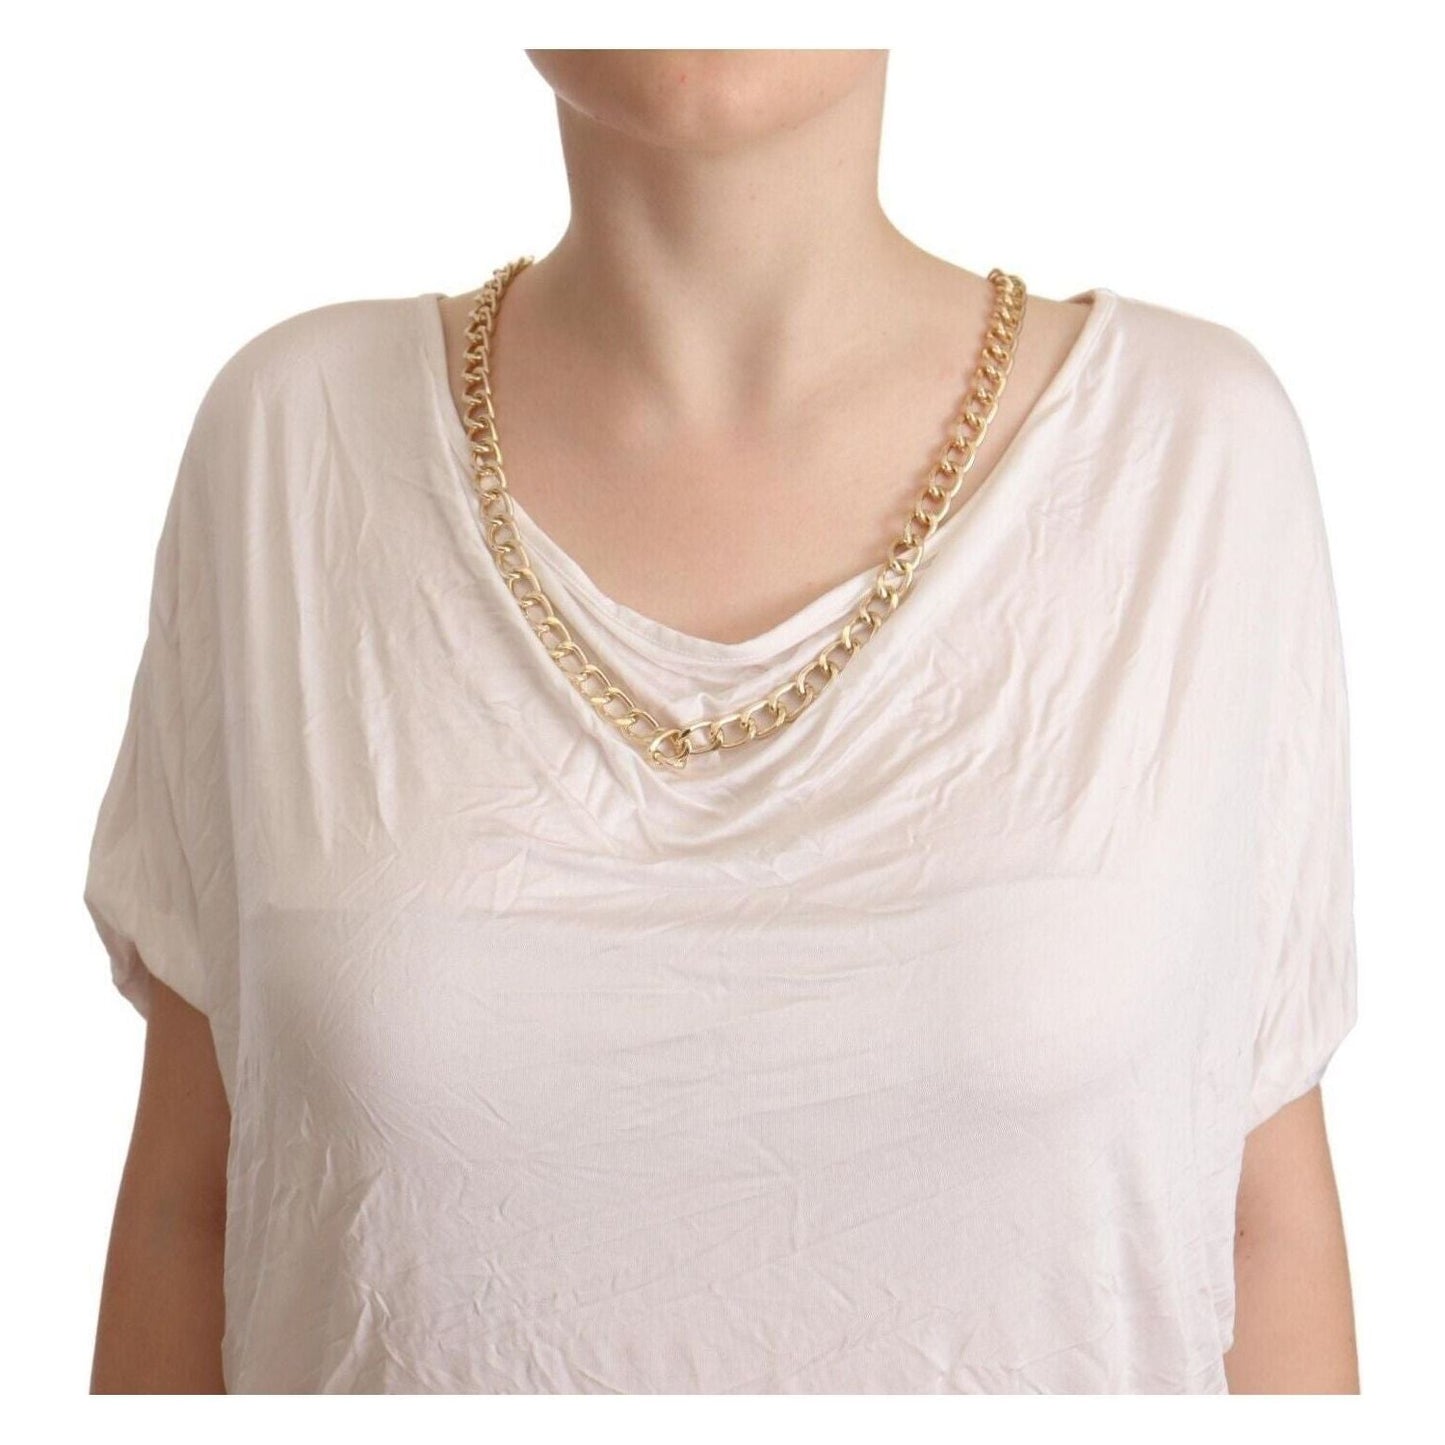 Guess By Marciano White Short Sleeves Gold Chain T-shirt Top white-short-sleeves-gold-chain-t-shirt-top s-l1600-3-2-6488c883-2cd.jpg